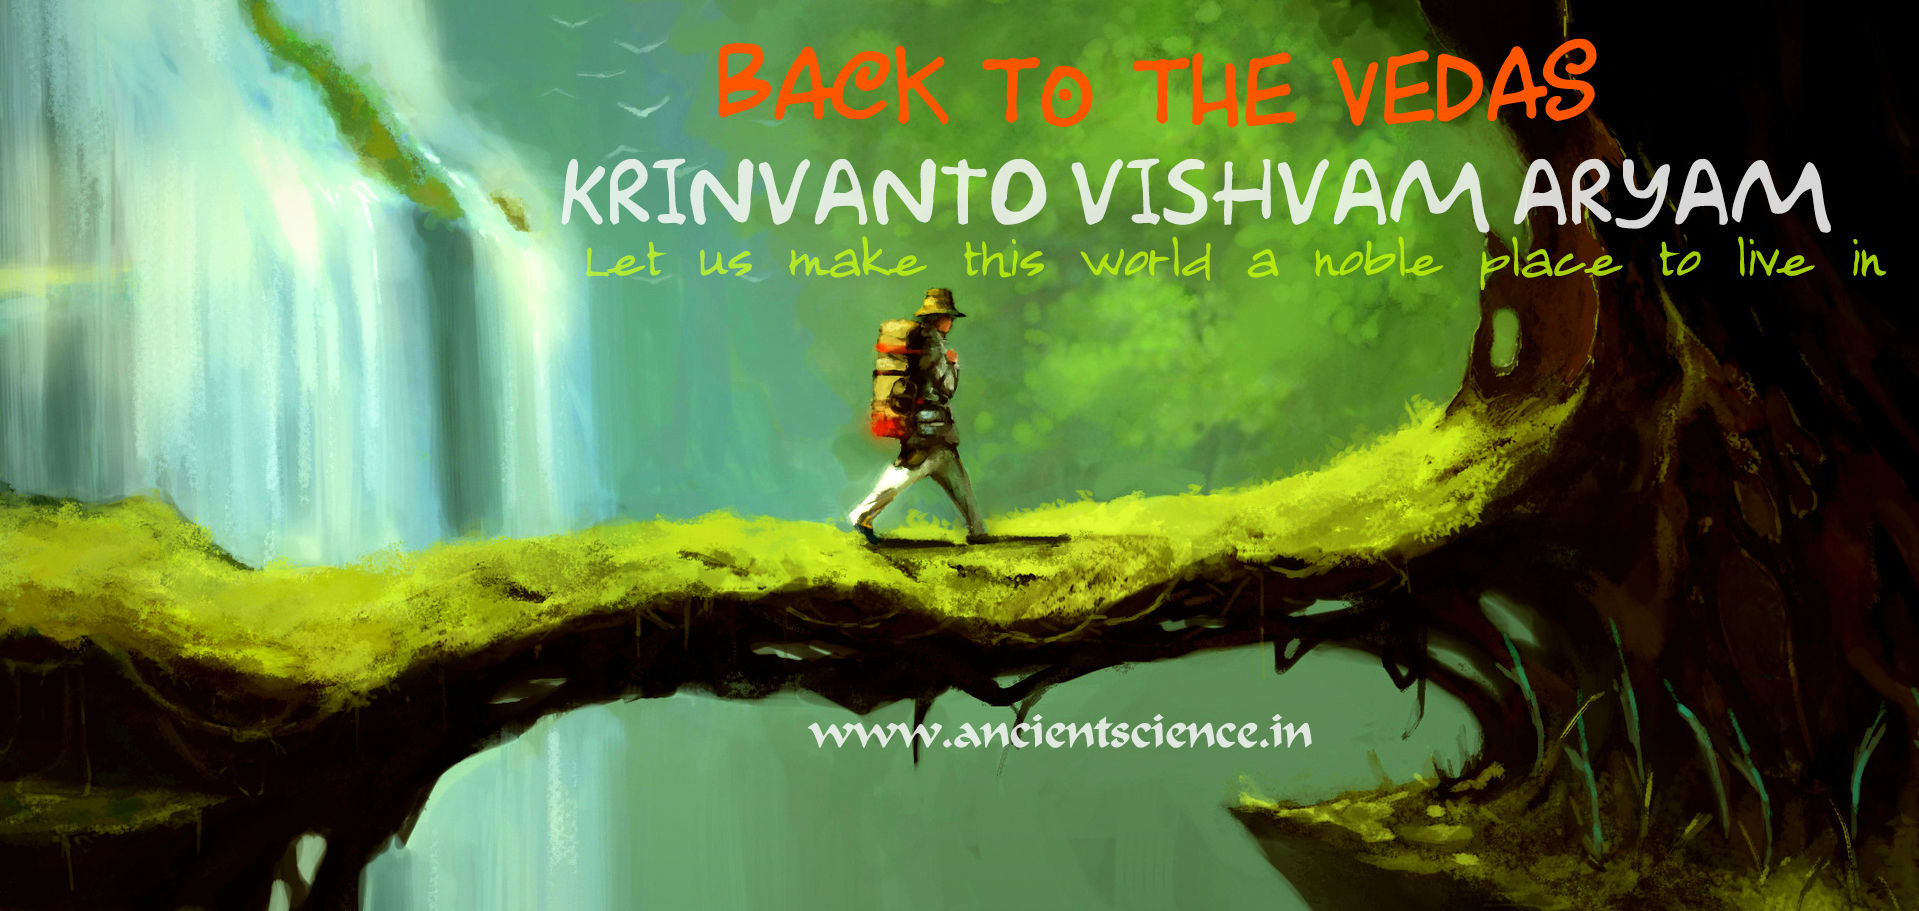 Why Back to the Vedas? - Ancient Science